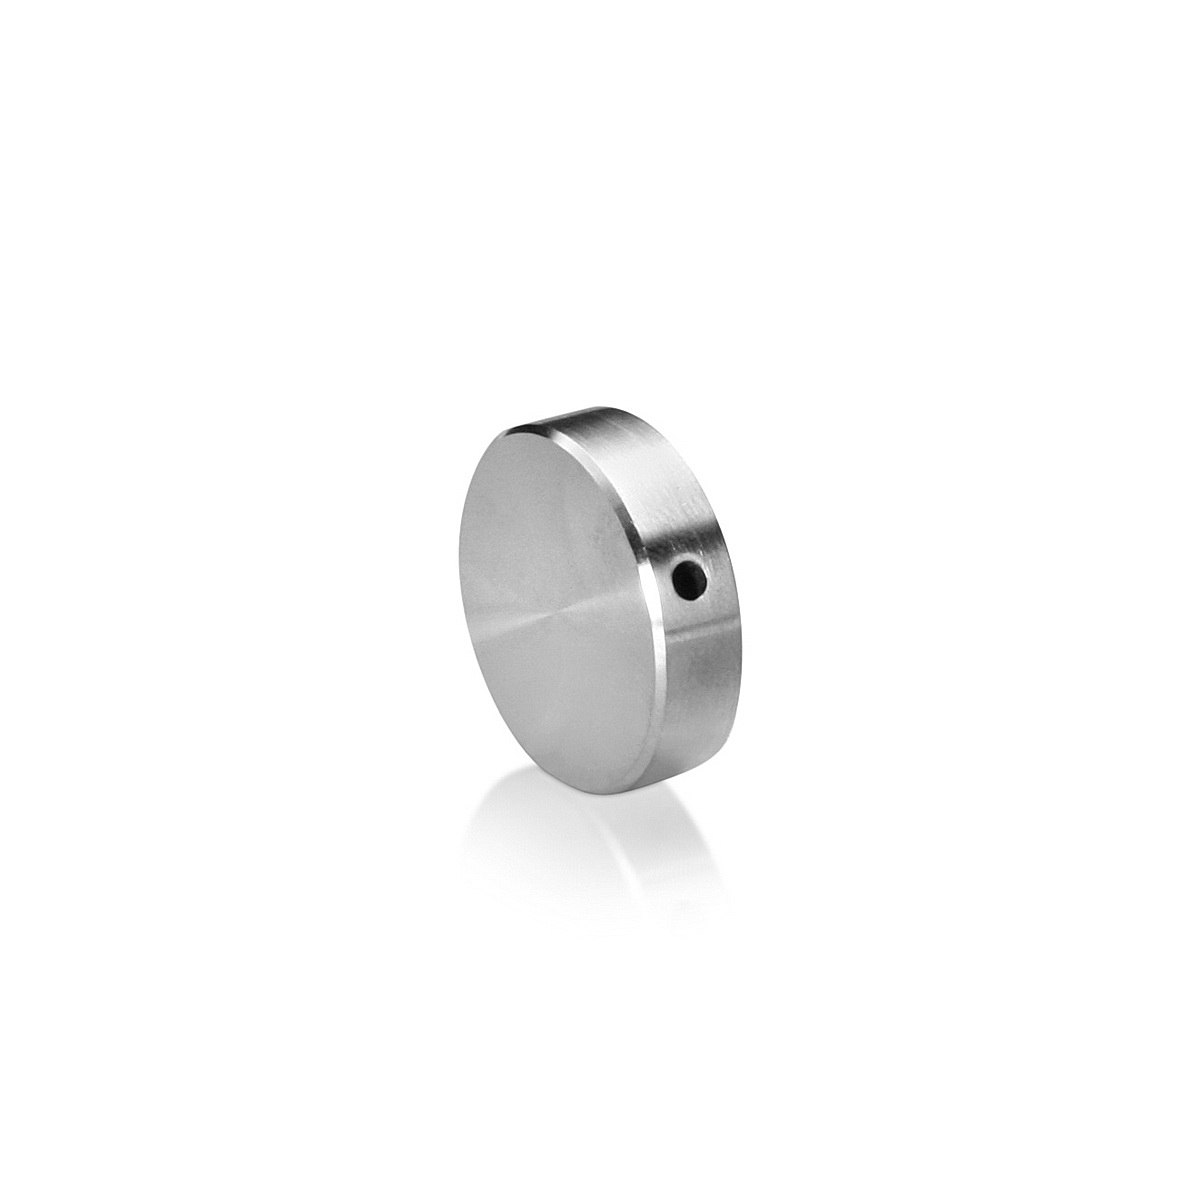 1/4-20 Threaded Locking Caps Diameter: 1'', Height: 1/4'', Brushed Satin Stainless Steel Grade 304 [Required Material Hole Size: 5/16'']